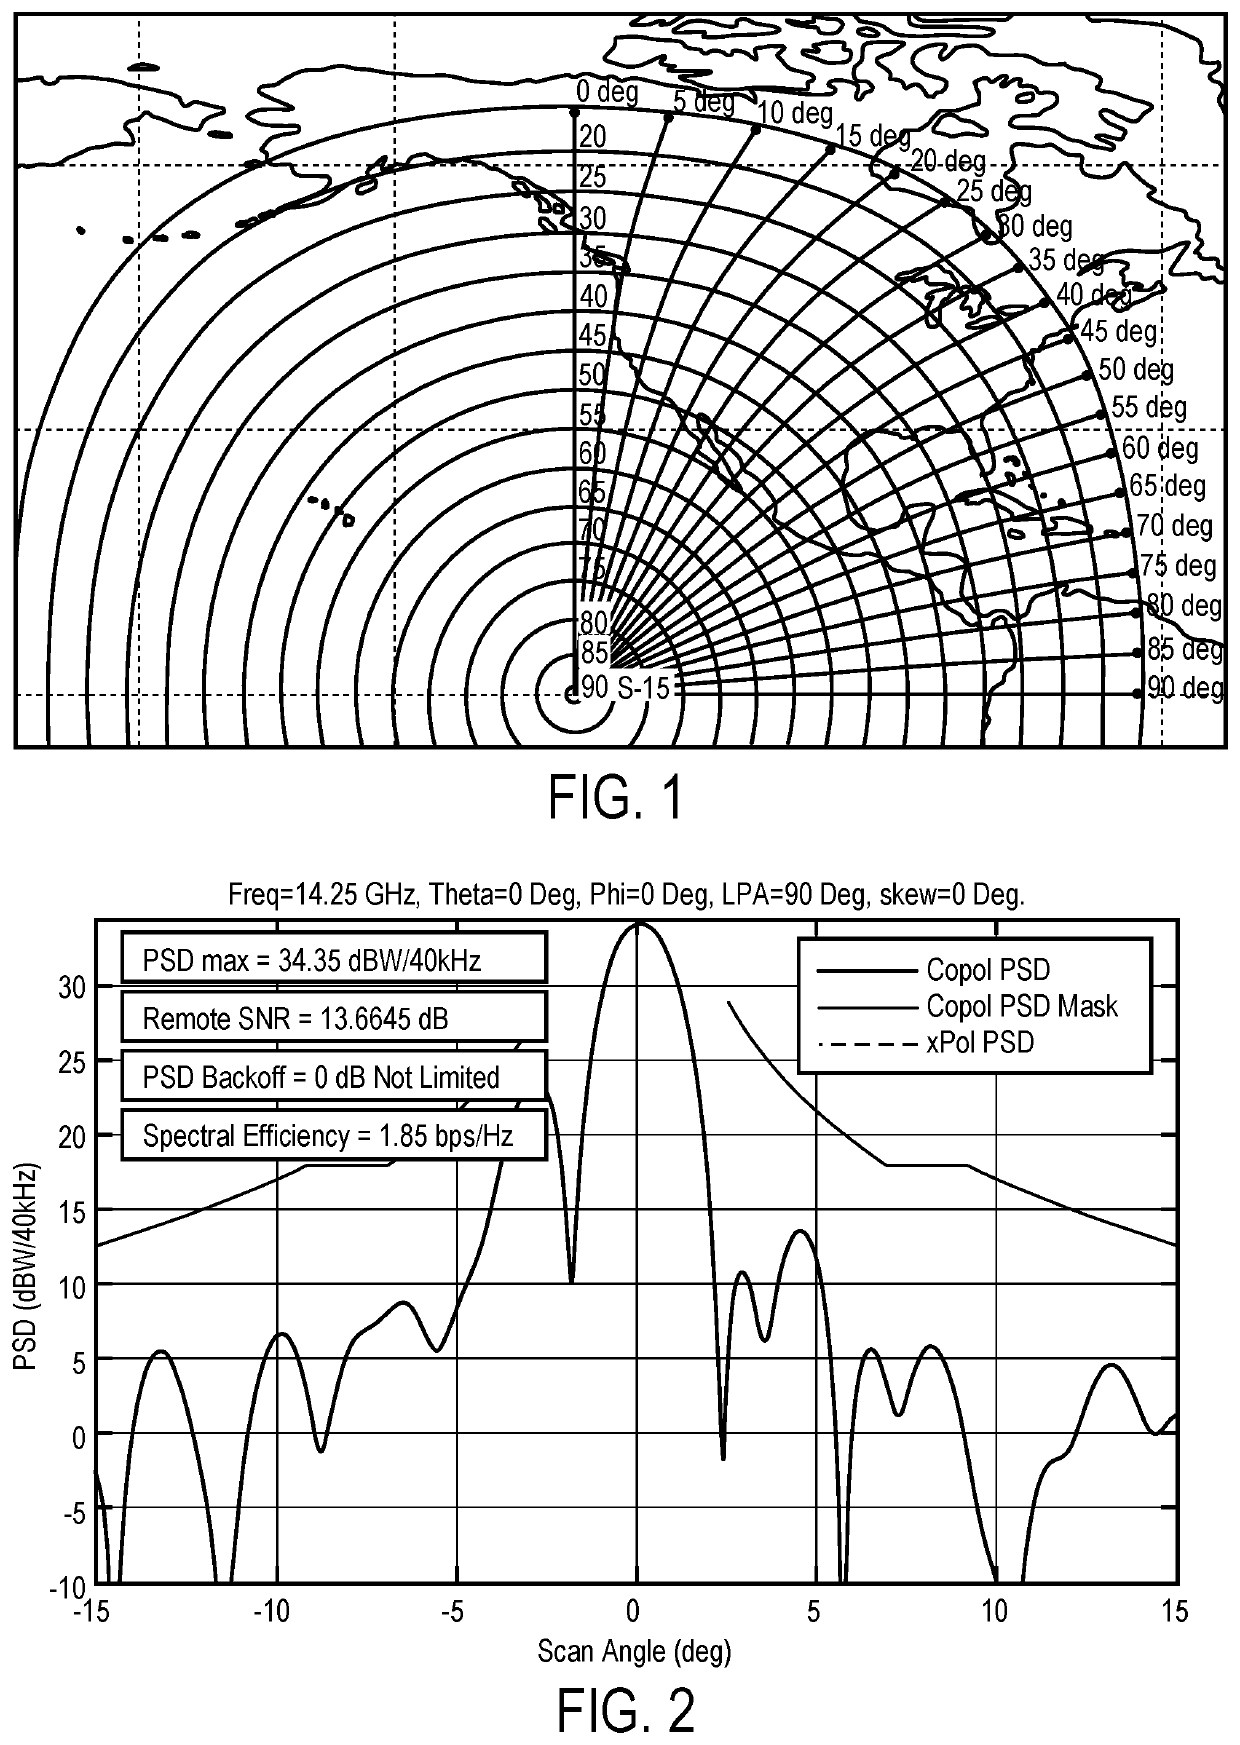 Uplink Power Control Using Power Spectral Density to Avoid Adjacent Satellite Interference